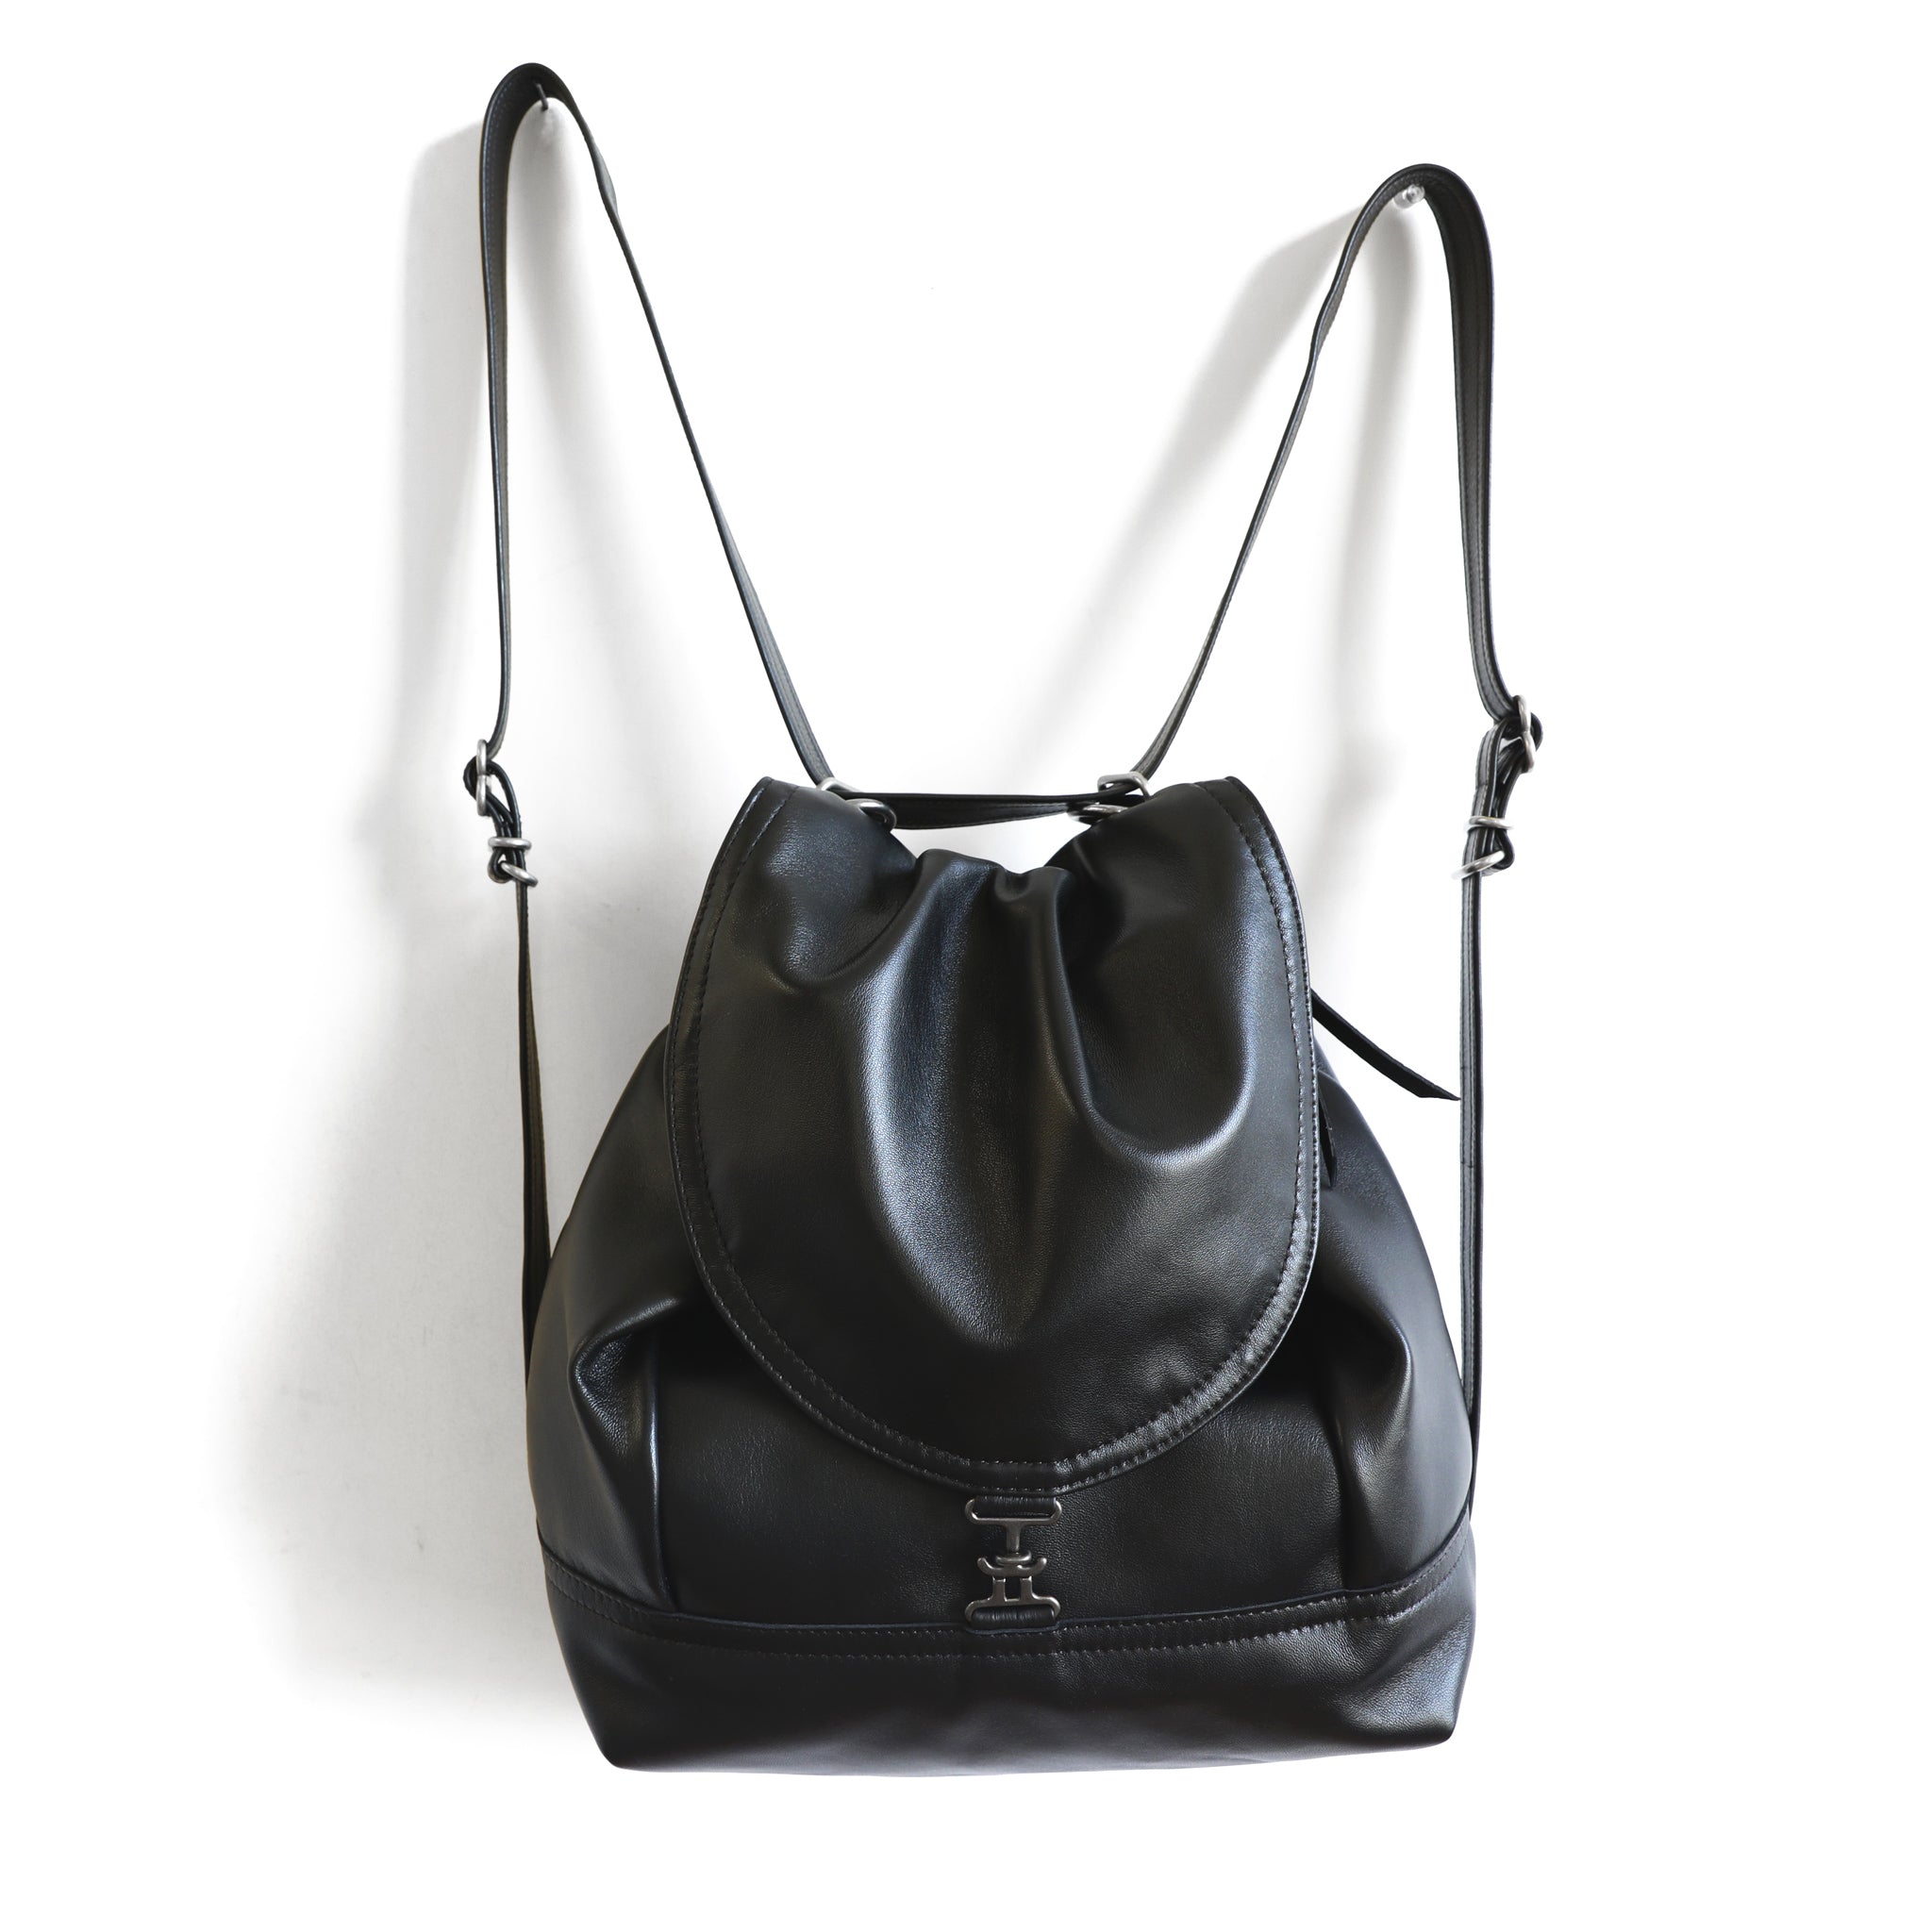 1904 maxwell size large in plonge black low-profile strap adjusted for backpack wear